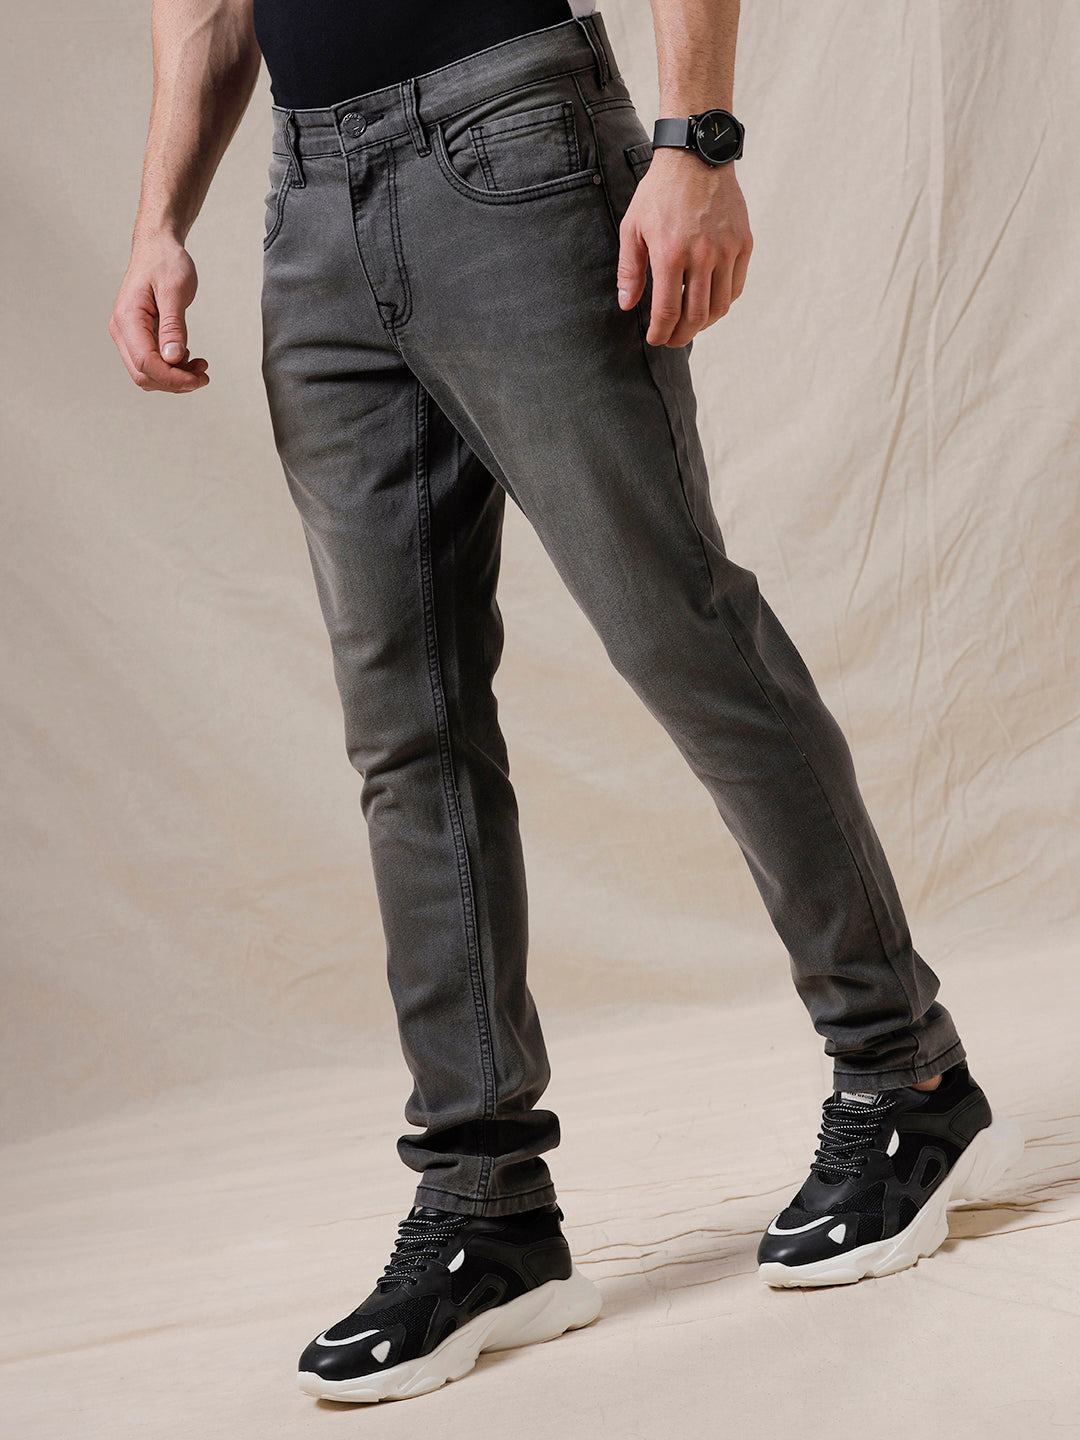 Solid Stone Grey Jeans